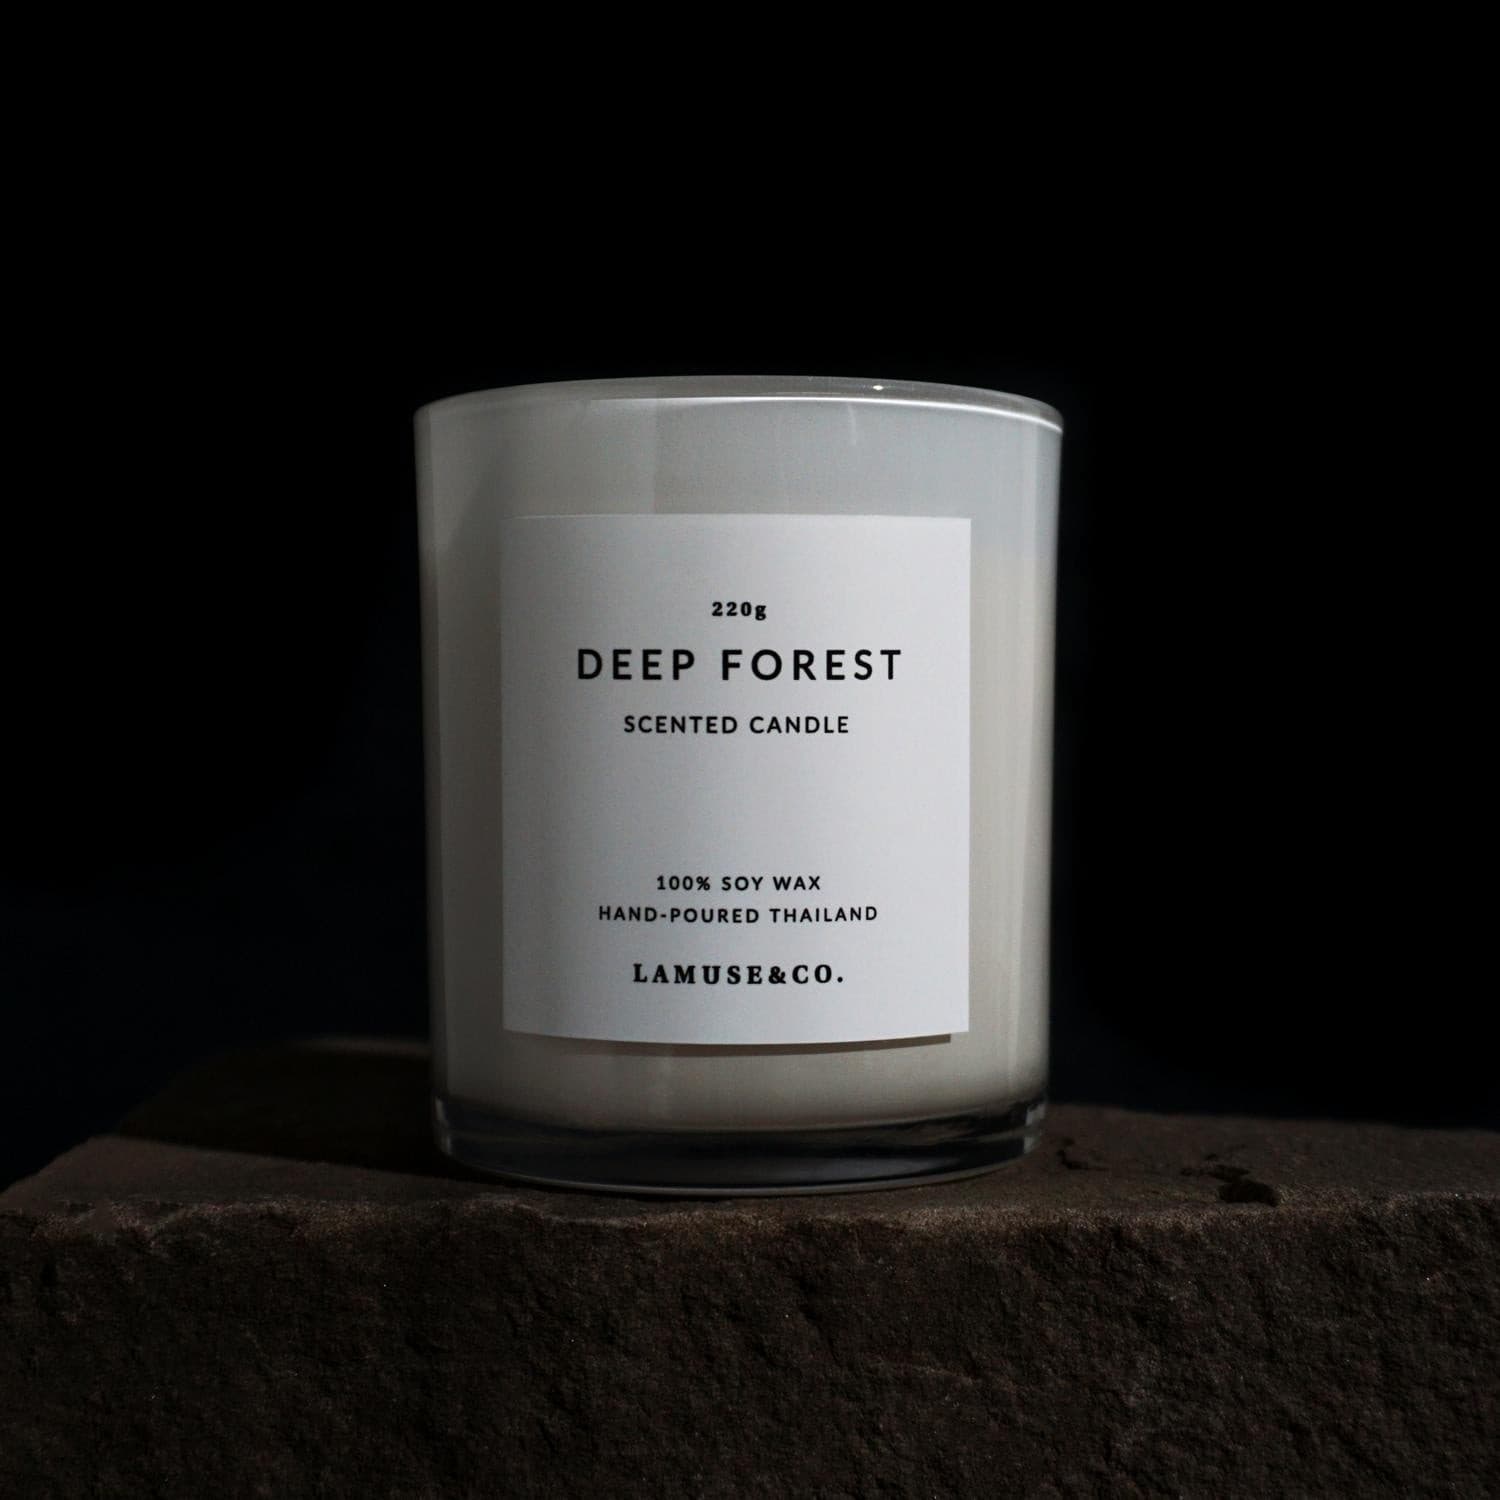 Deep Forest Scented Candle 220g scented candle.